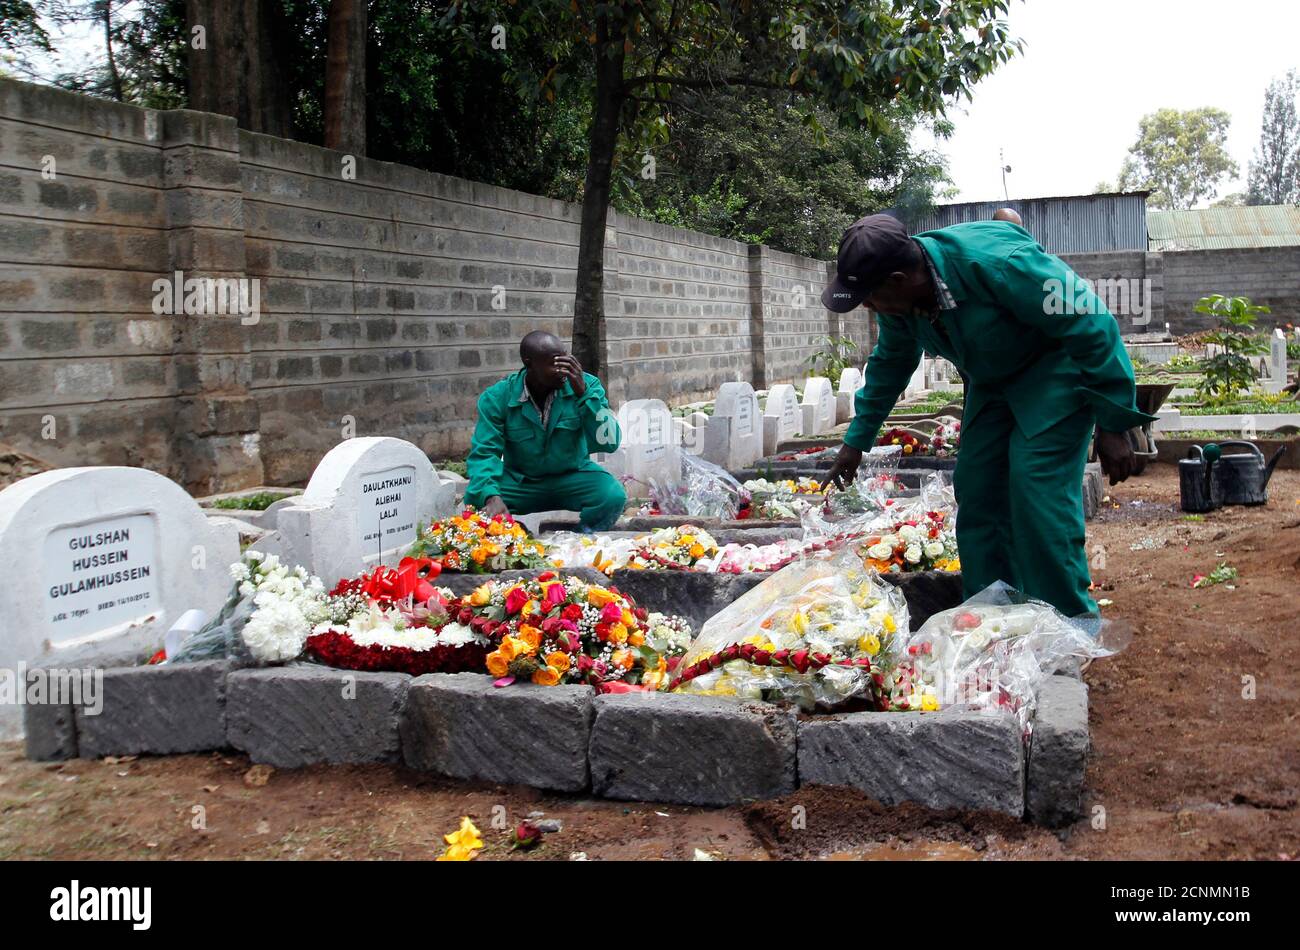 Cemetery workers arrange flowers on the grave of Kenyan journalist Ruhila Adatia Sood, who was killed in the Westgate shopping mall attack, during her funeral in Kenya's capital Nairobi September 26, 2013. U.S., British and Israeli agencies are helping Kenya investigate the attack claimed by Somali Islamist militants on the Nairobi shopping mall that killed at least 72 people and destroyed part of the complex, officials said on Wednesday.   REUTERS/Thomas Mukoya (KENYA - Tags: CIVIL UNREST CRIME LAW) Stock Photo